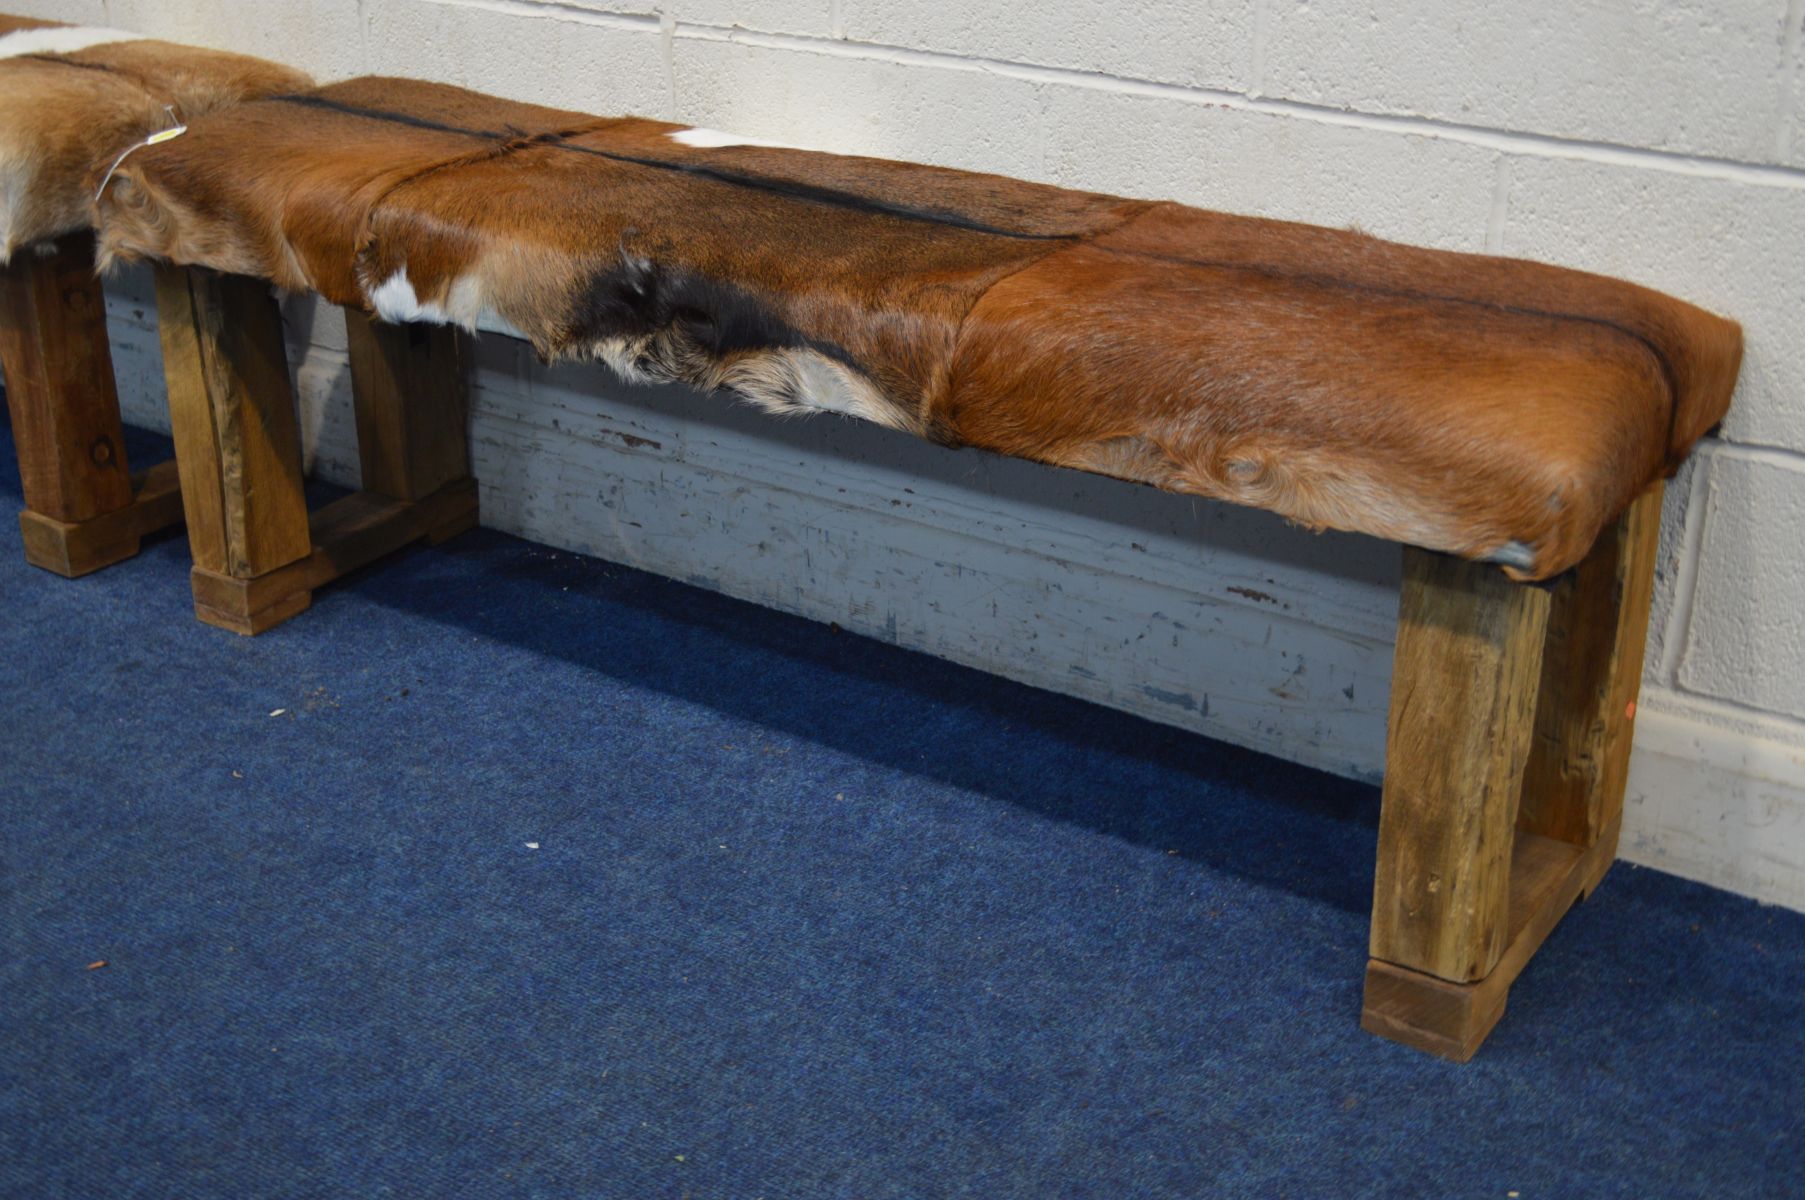 A PAIR OF RUSTIC RECTANGULAR STOOLS with animal hide seat covers, width 152cm x depth 44cm x - Image 3 of 3